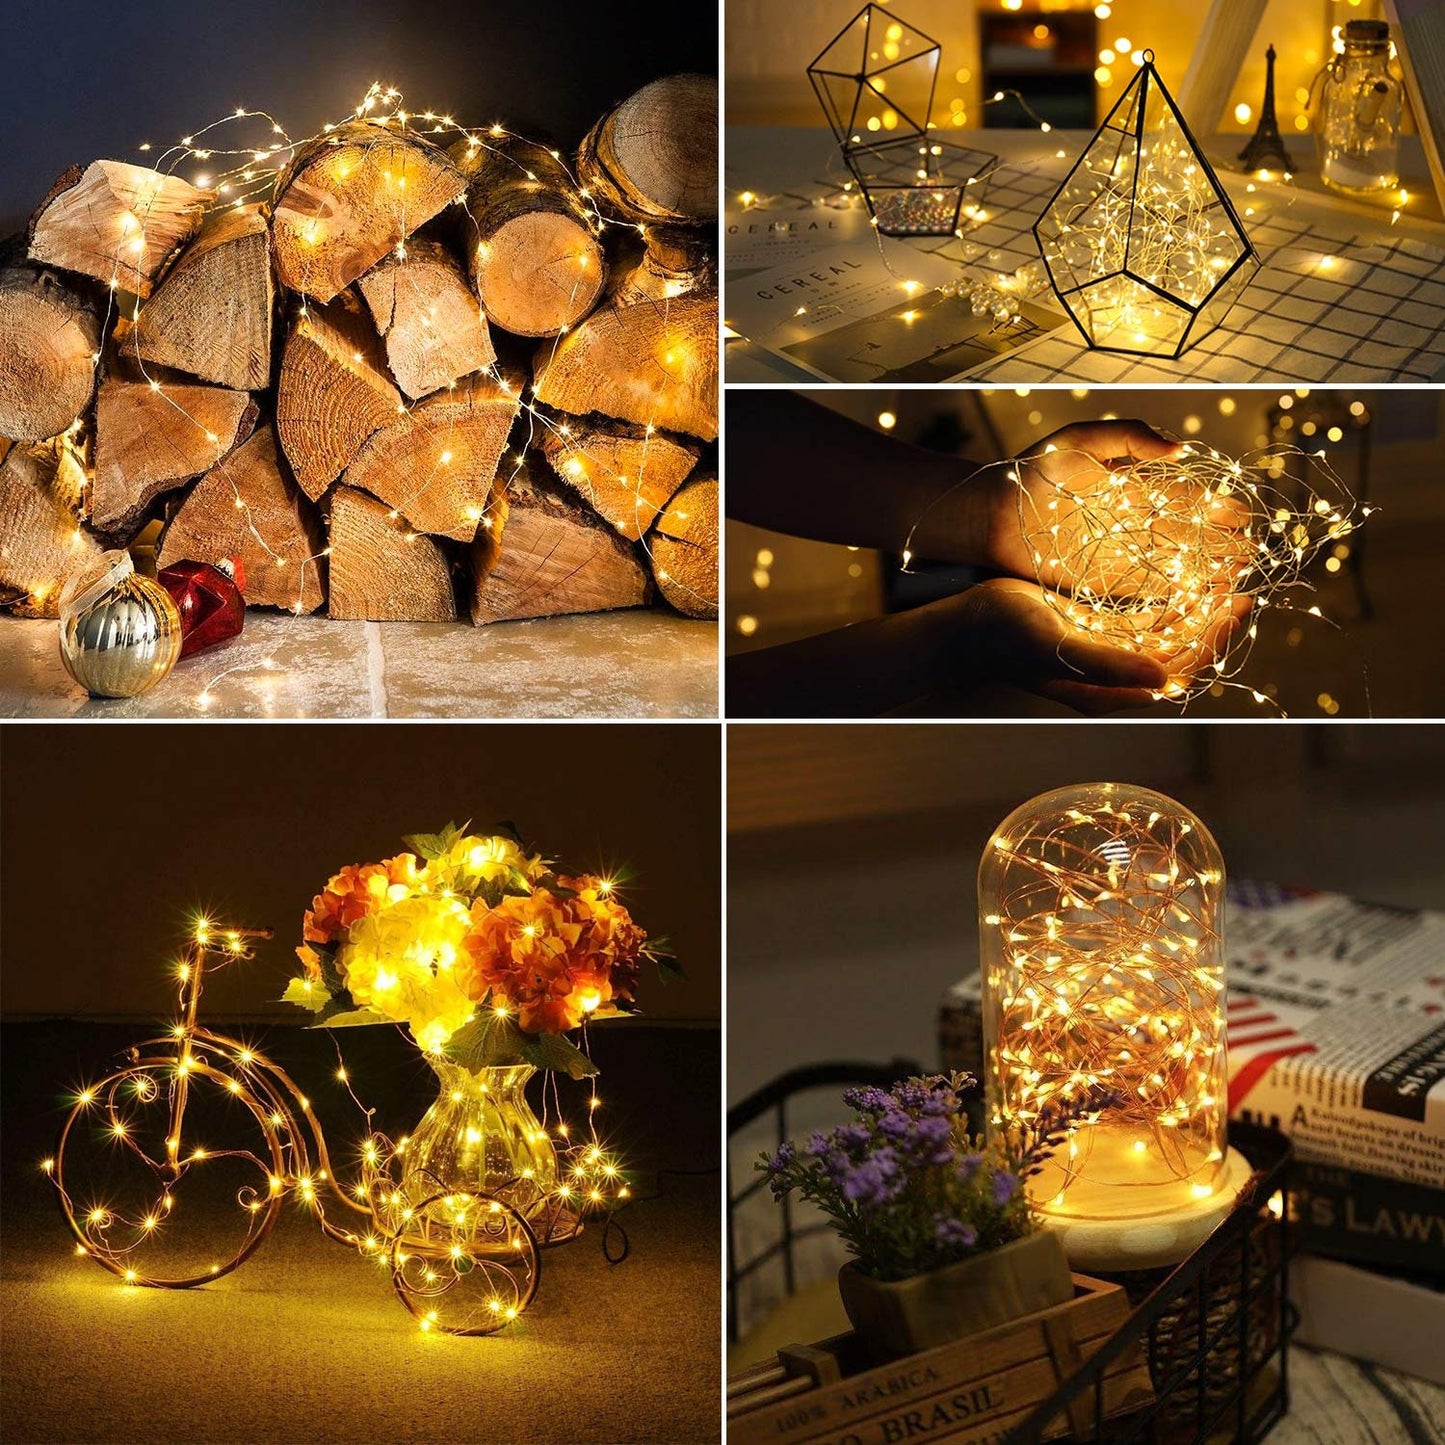 99ft LED Fairy String Lights Dimmable for Christmas, Bedroom, Birthday, Wedding, Party, Warm White